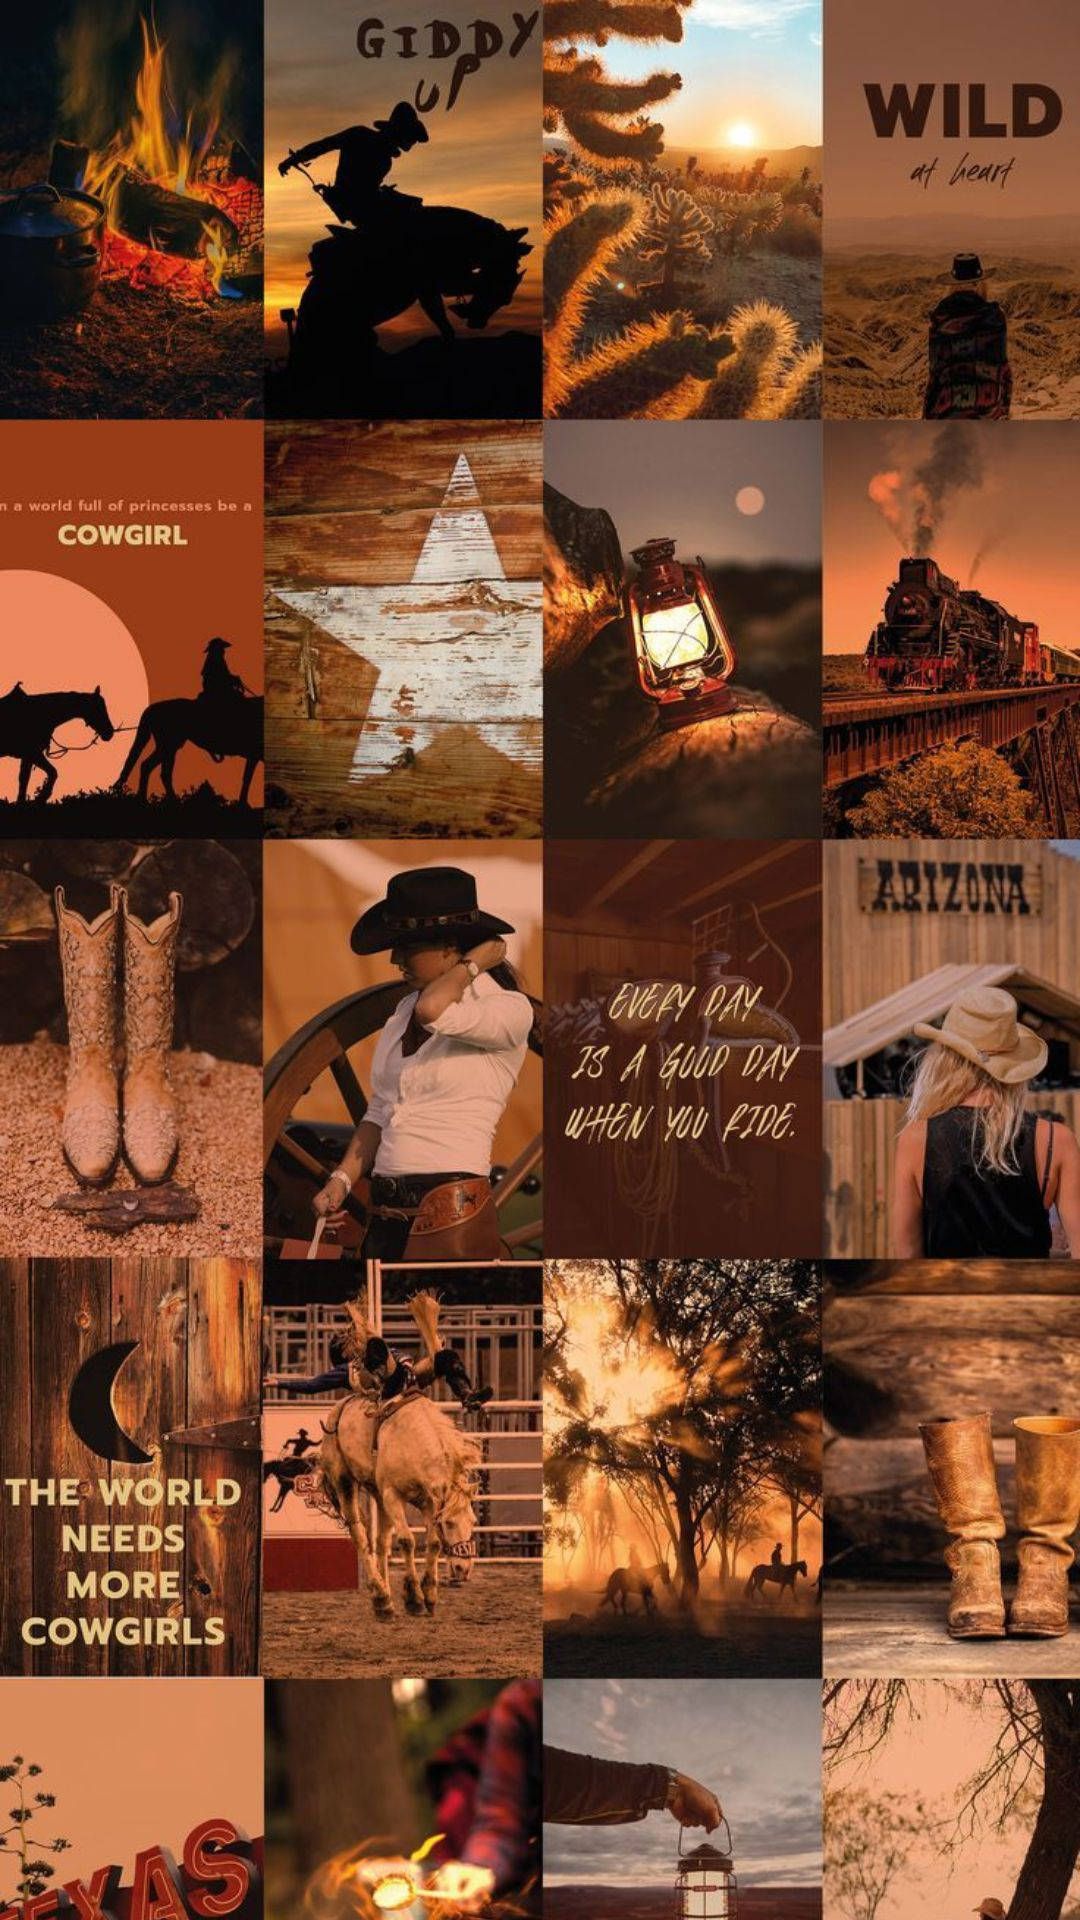 Free Cowgirl Wallpaper Downloads, Cowgirl Wallpaper for FREE